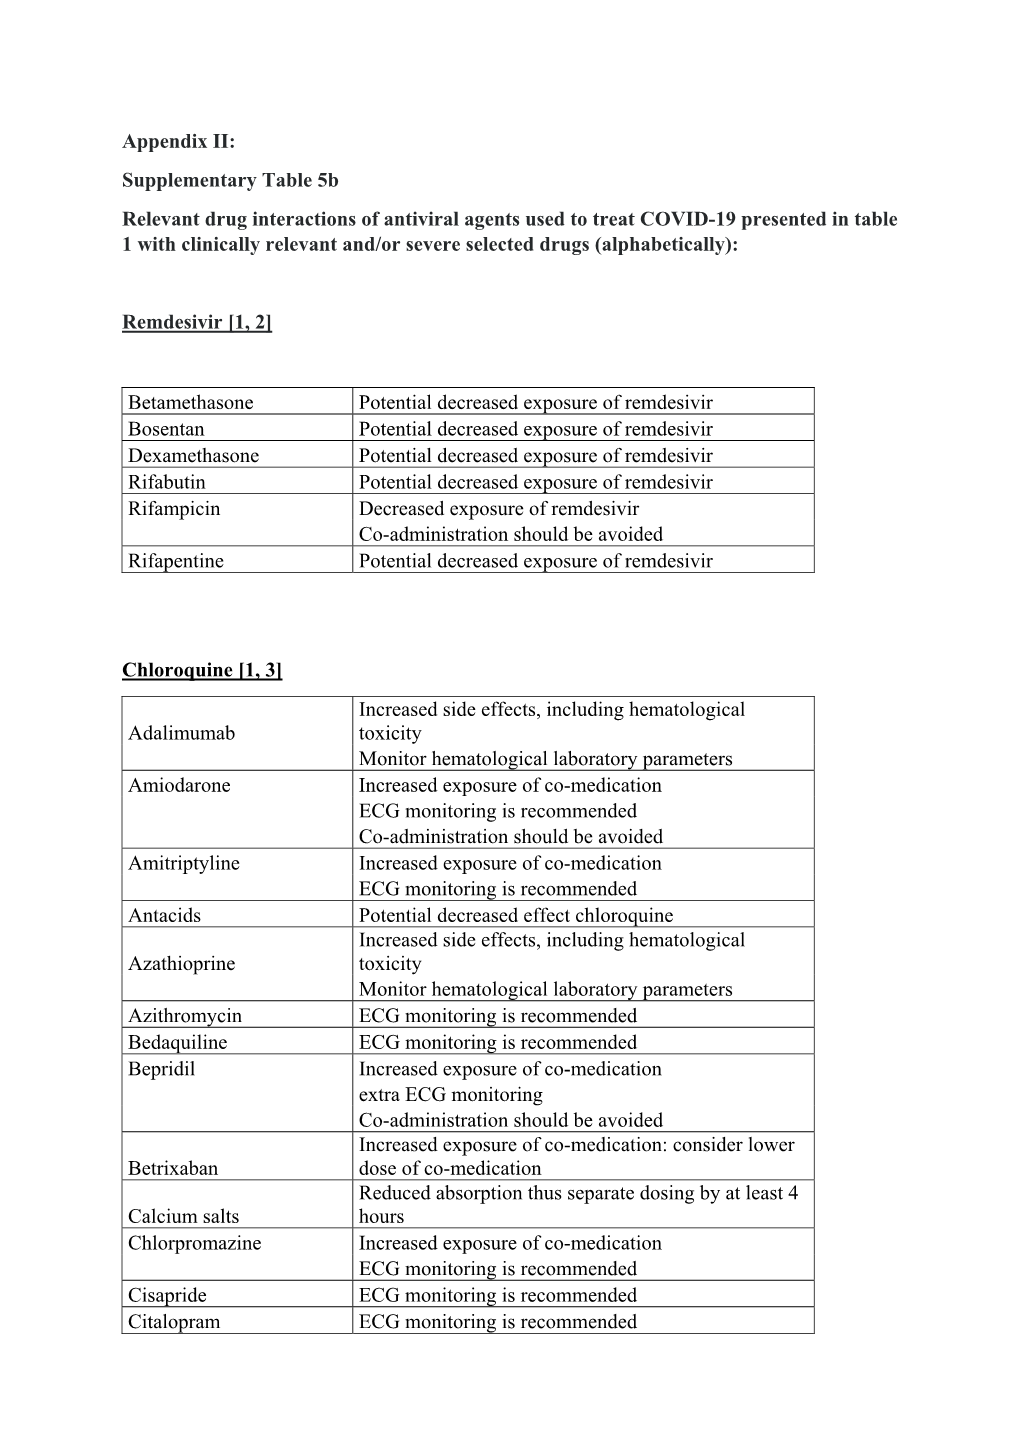 Supplementary Table 5B Relevant Drug Interactions of Antiviral Agents